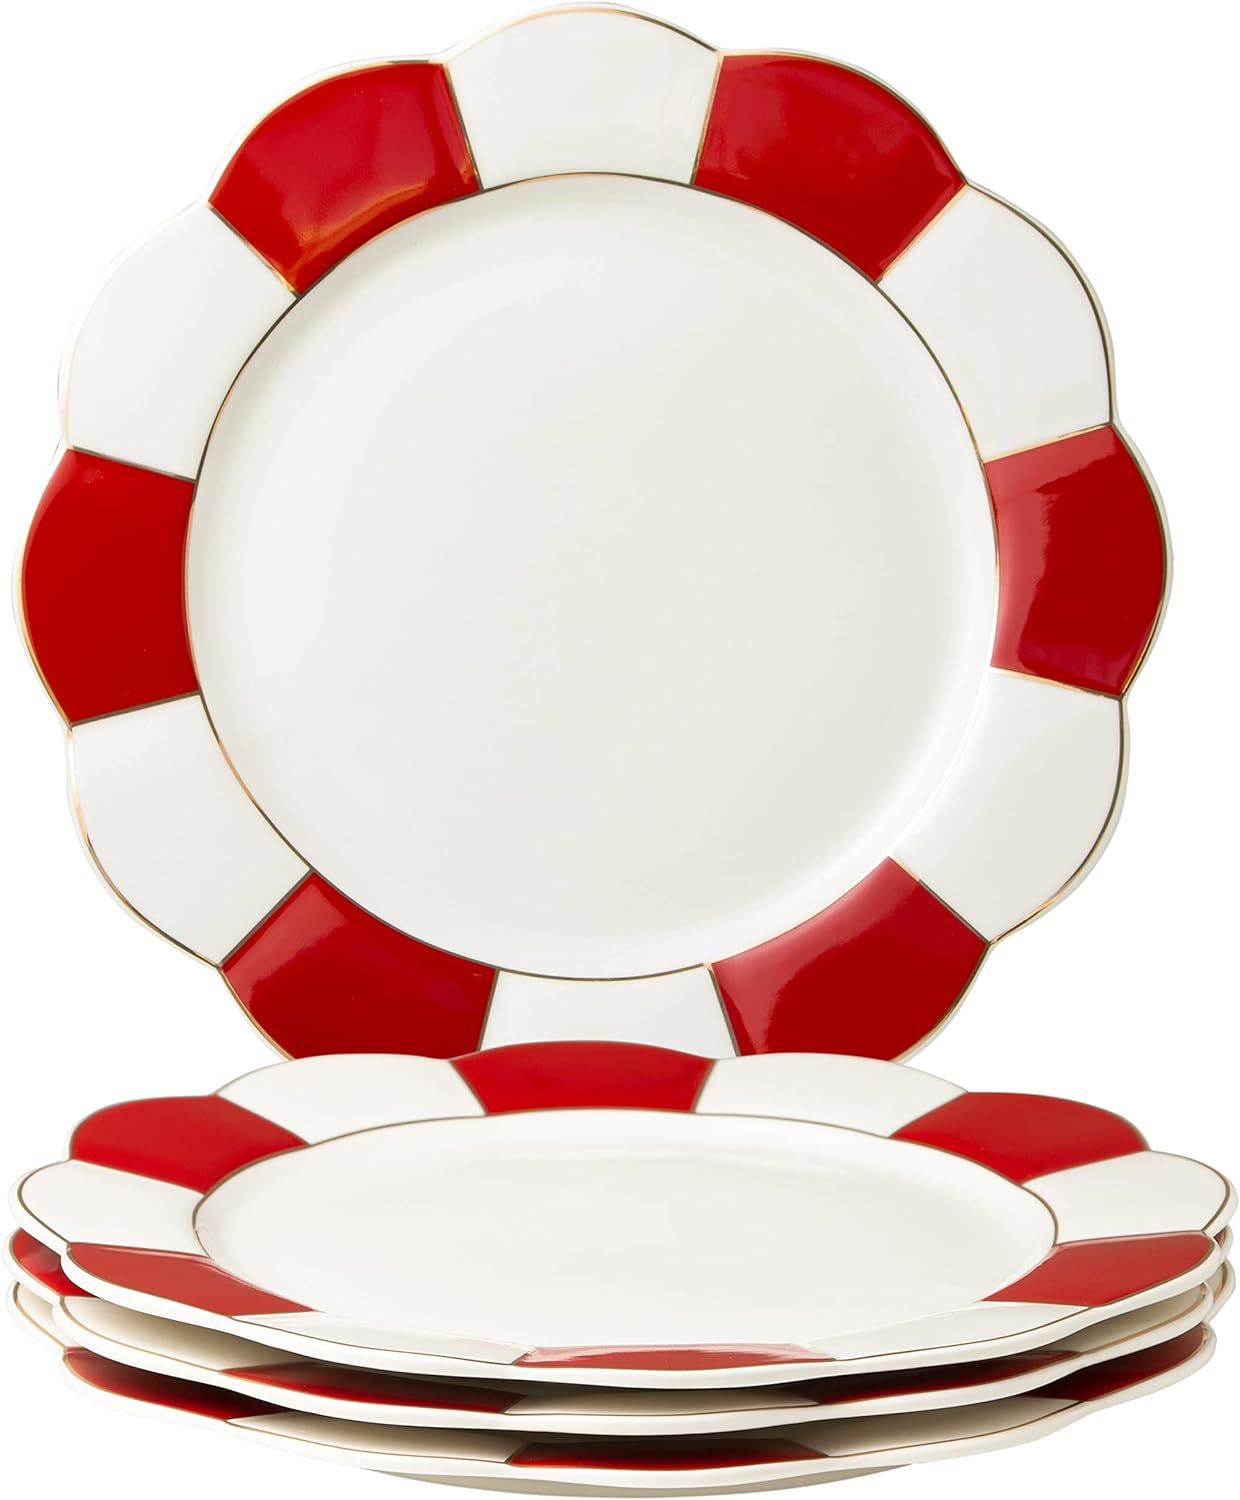 Gracie China Porcelain Red Gold Scallop Dinner Plates, Set of 4 (11-Inch) | Amazon (US)